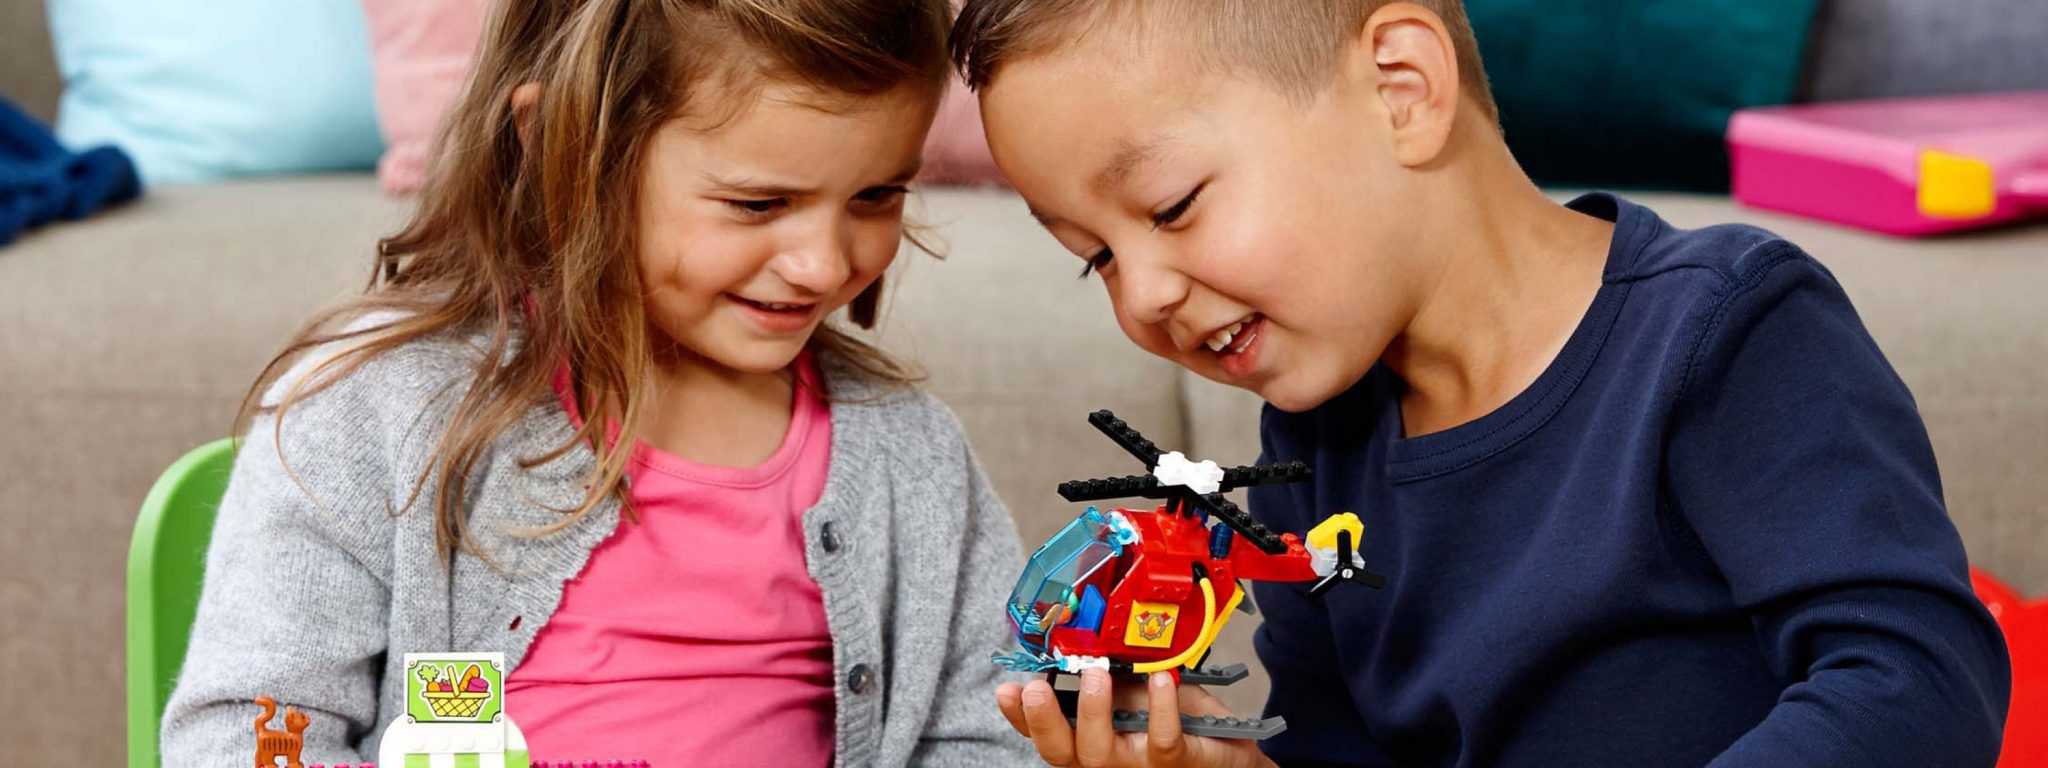 Kids playing with a Lego helicopter